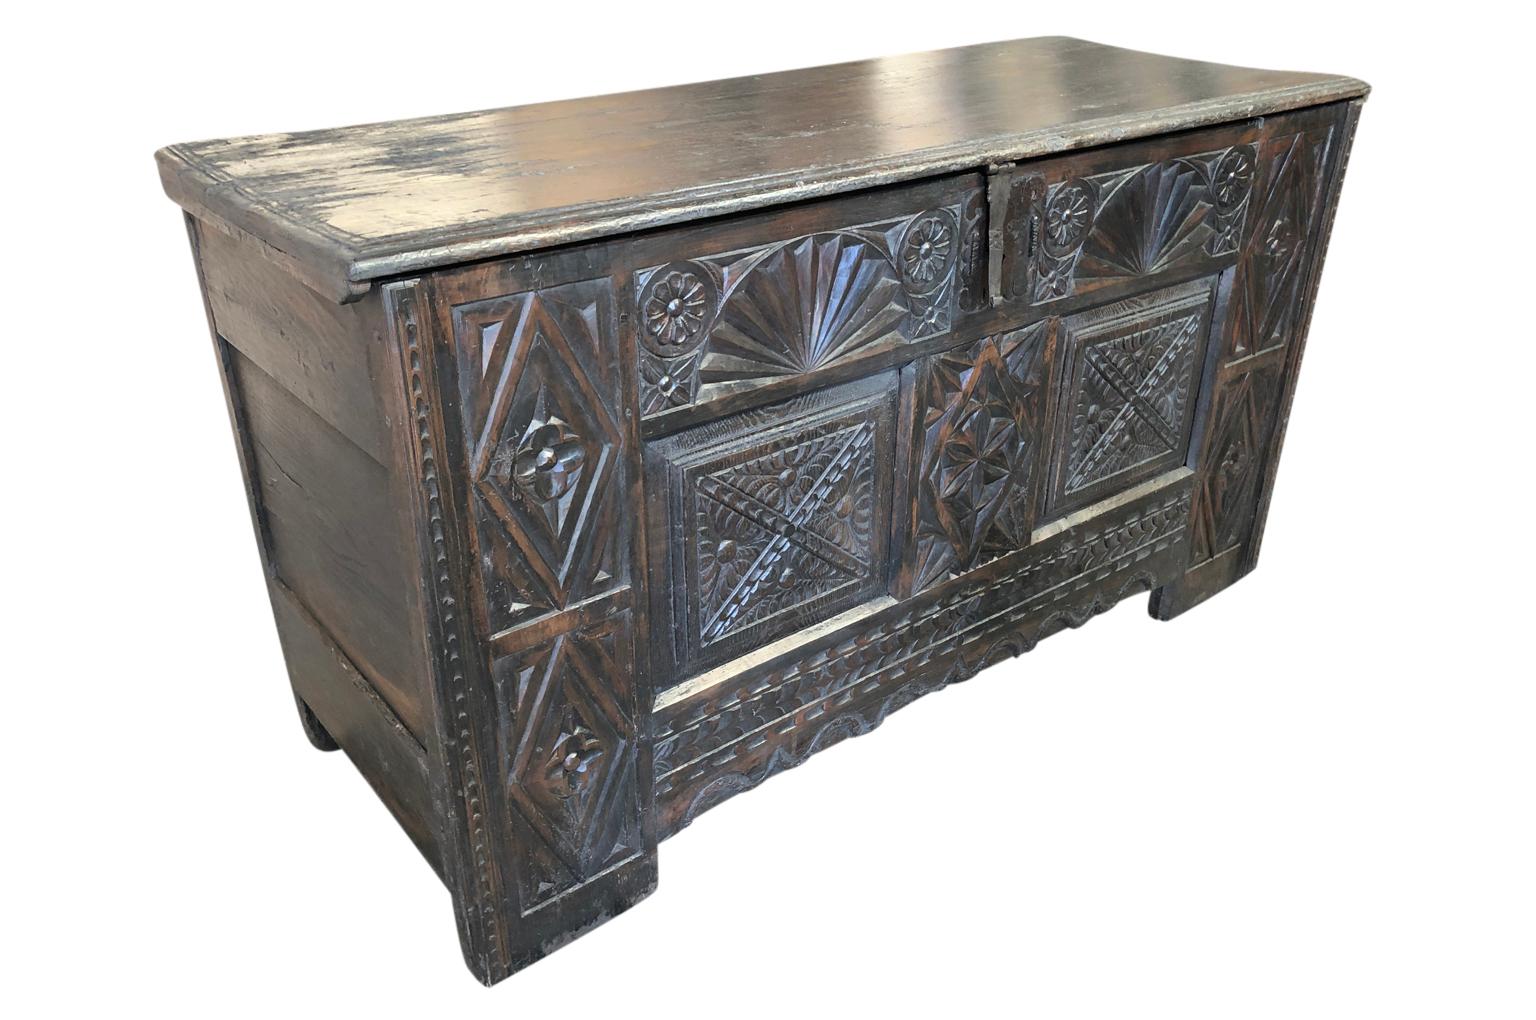 A very handsome mid-18th century trunk - coffre from the Catalan region of Spain. Soundly constructed from oak, richly stained and with wonderful carving detail. A terrific storage piece.